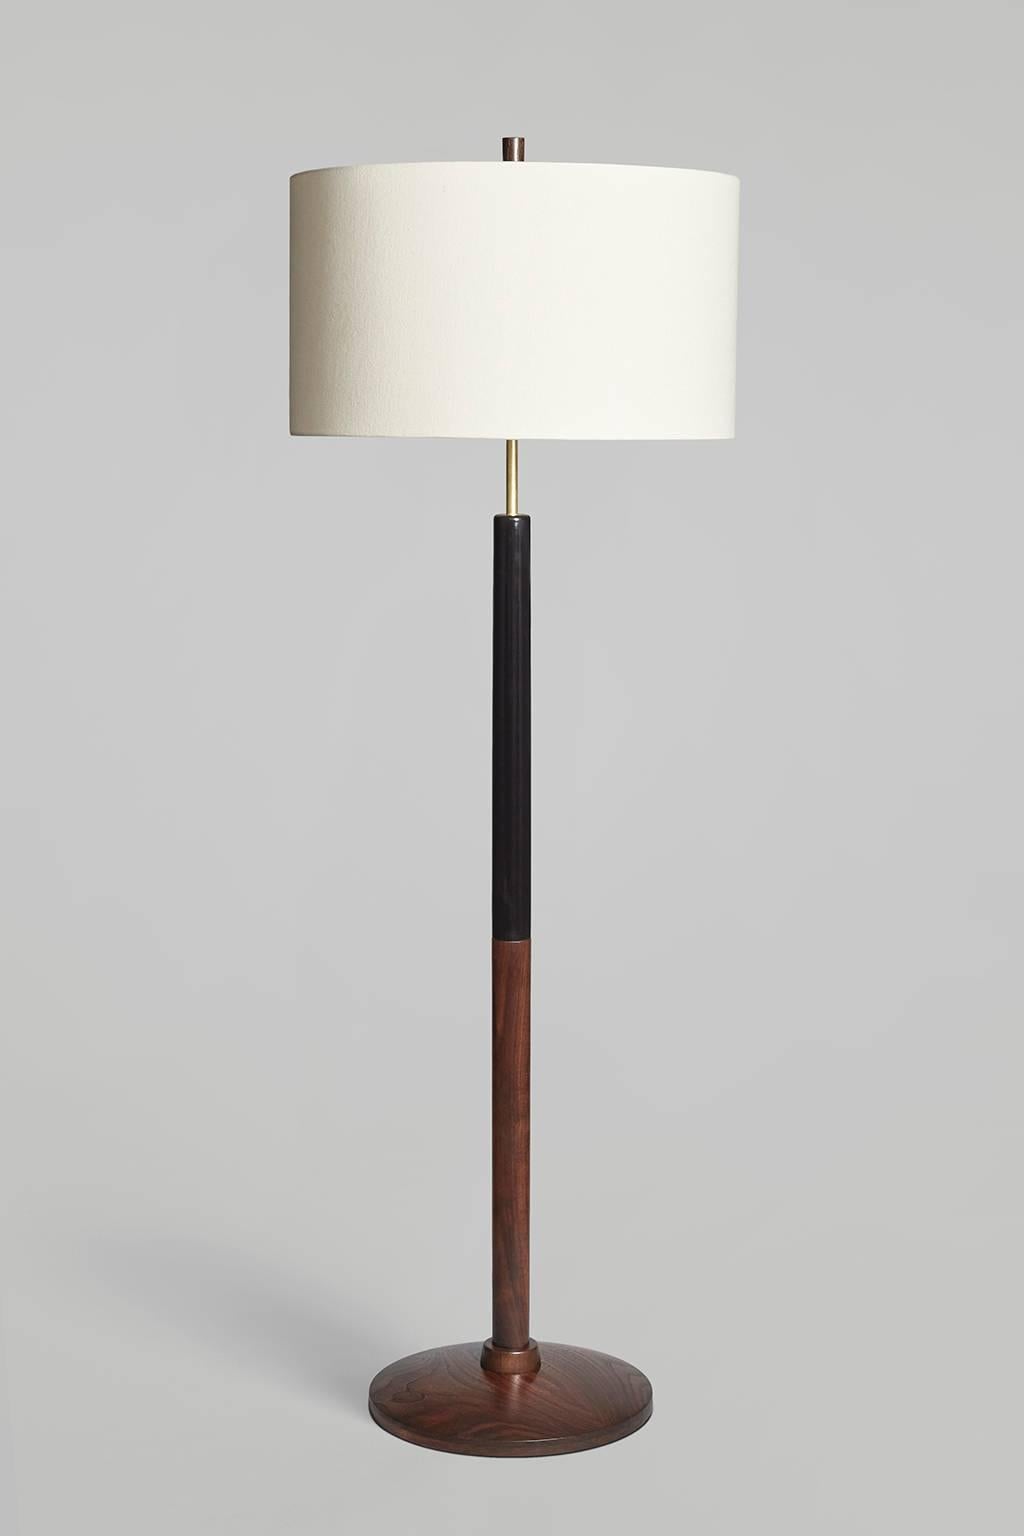 The Altmar I floor lamp pairs a warm, curving disc of figured walnut, with a spare, vertical form to hold its large shade. Base of walnut and ebonized maple, with a walnut neck and finial. Brass hardware, black fabric-covered cord, trimless, and